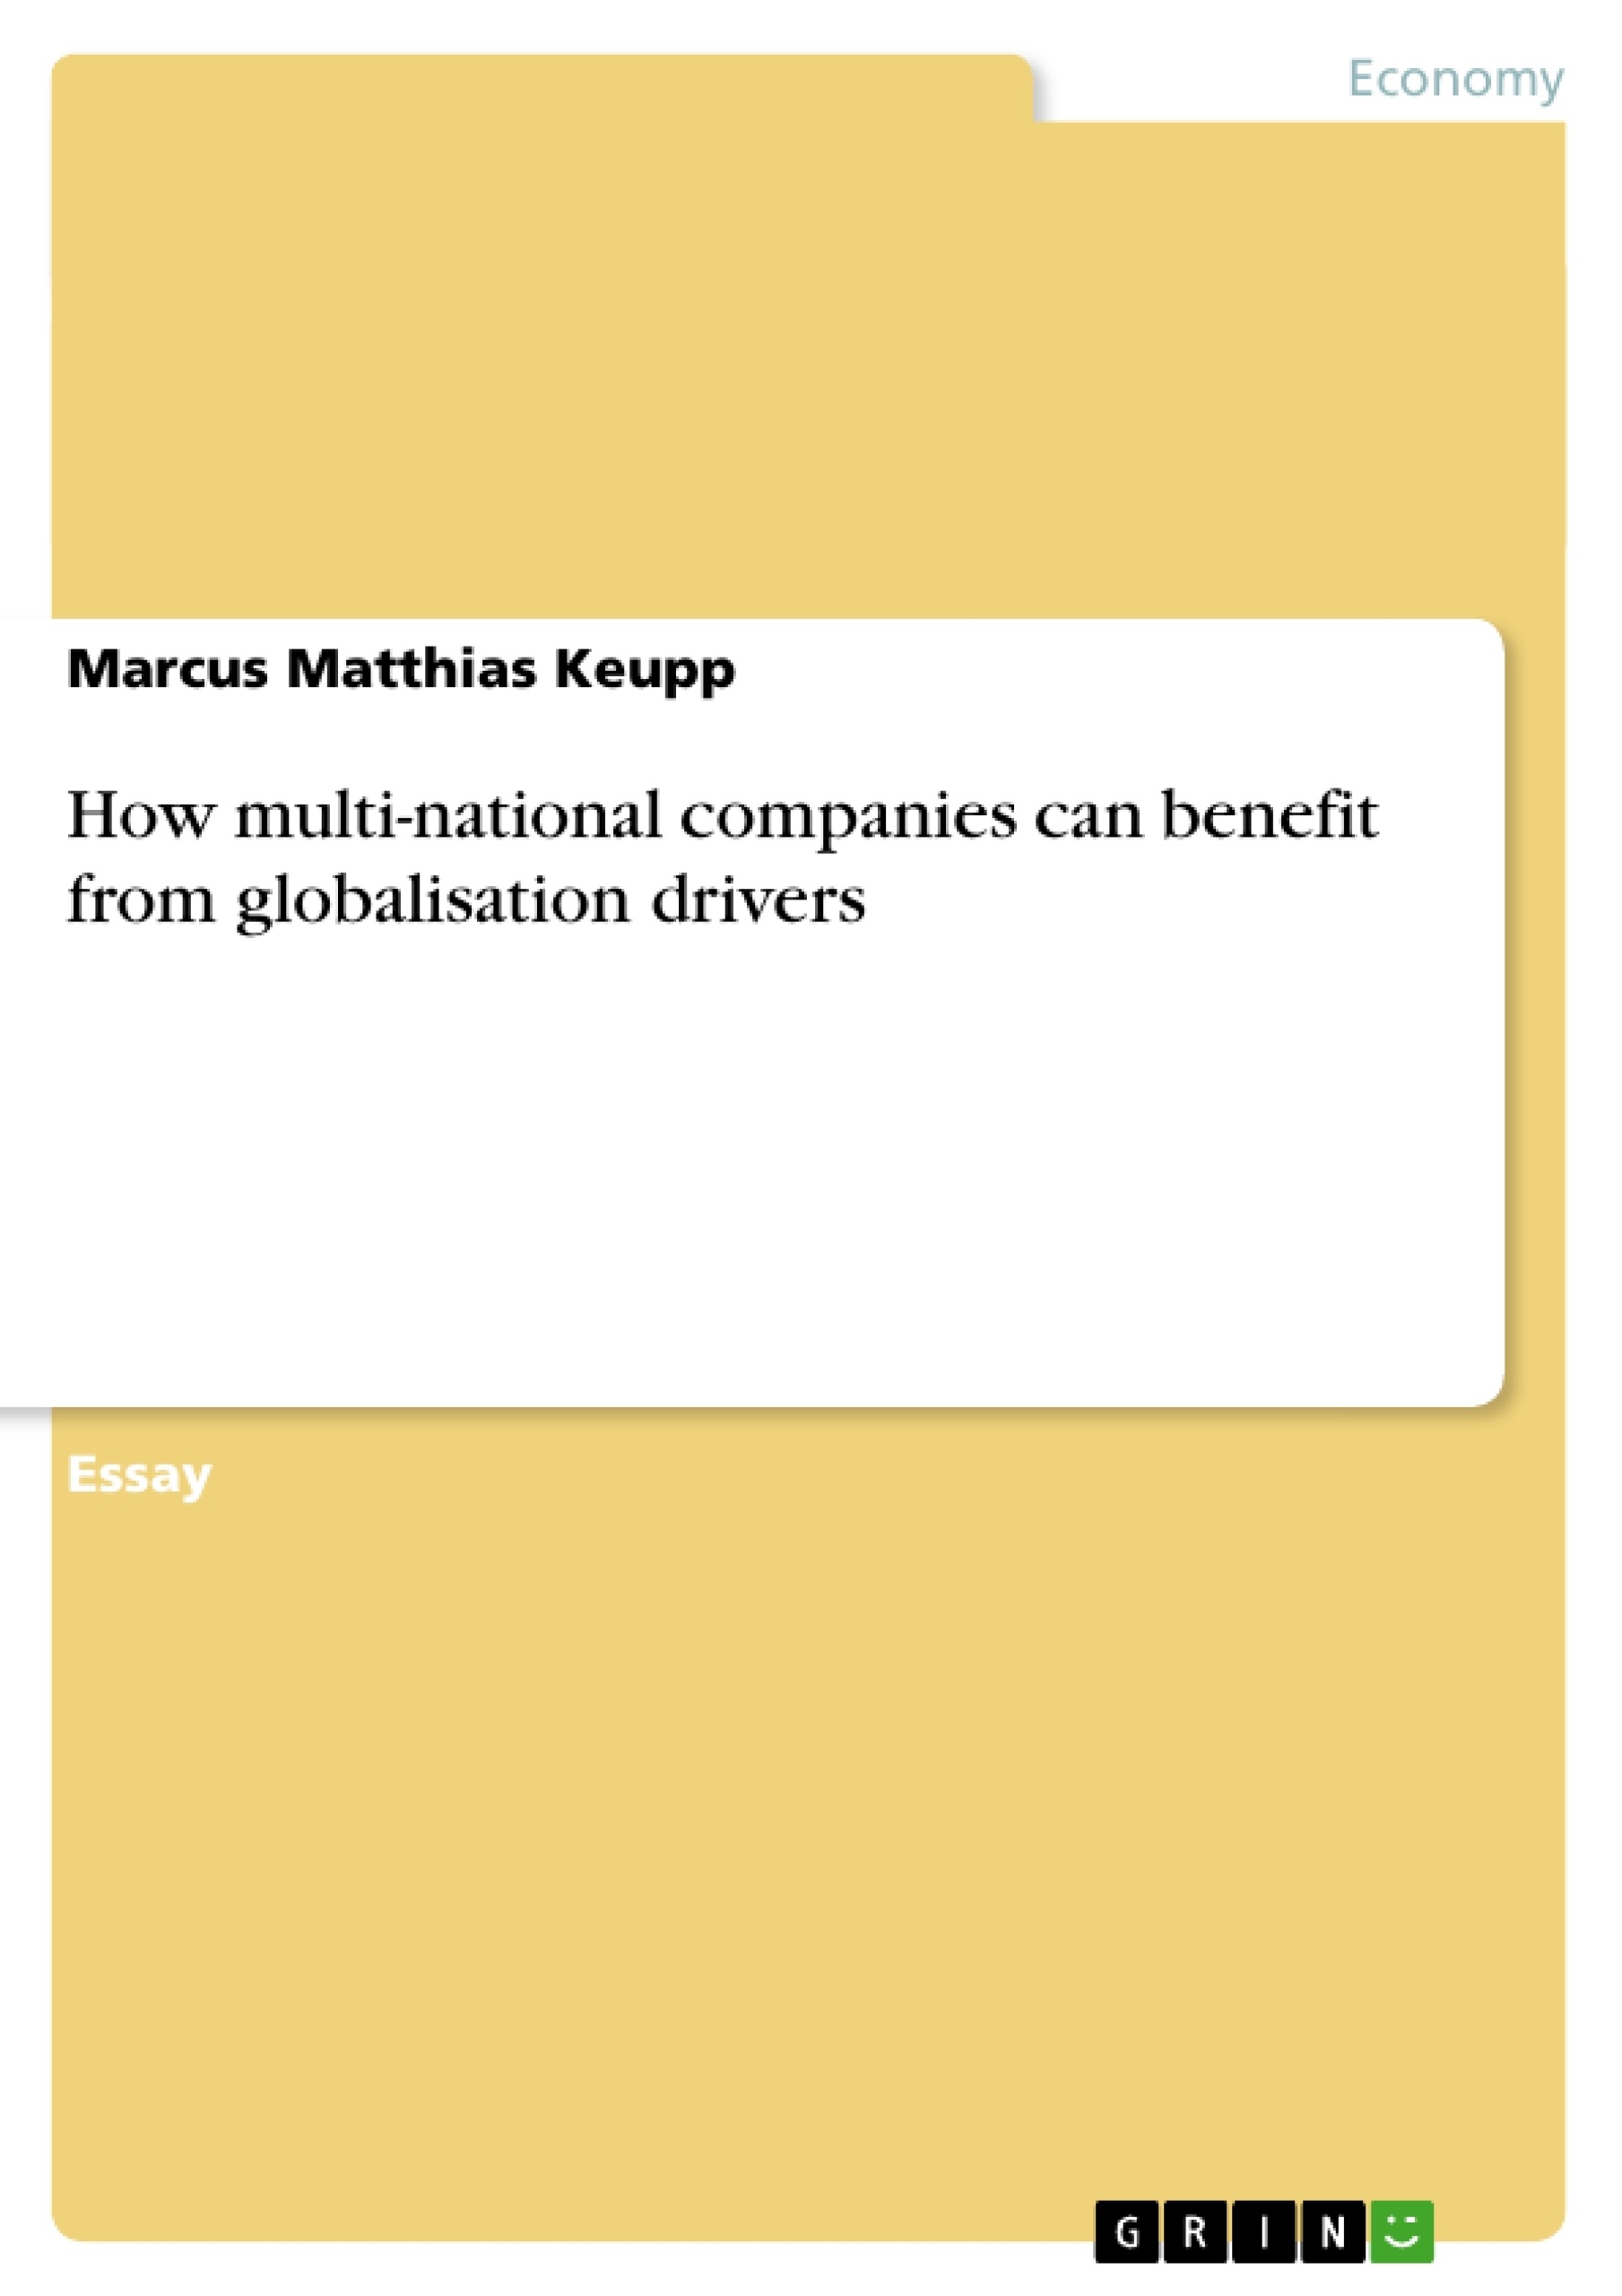 Title: How multi-national companies can benefit from globalisation drivers